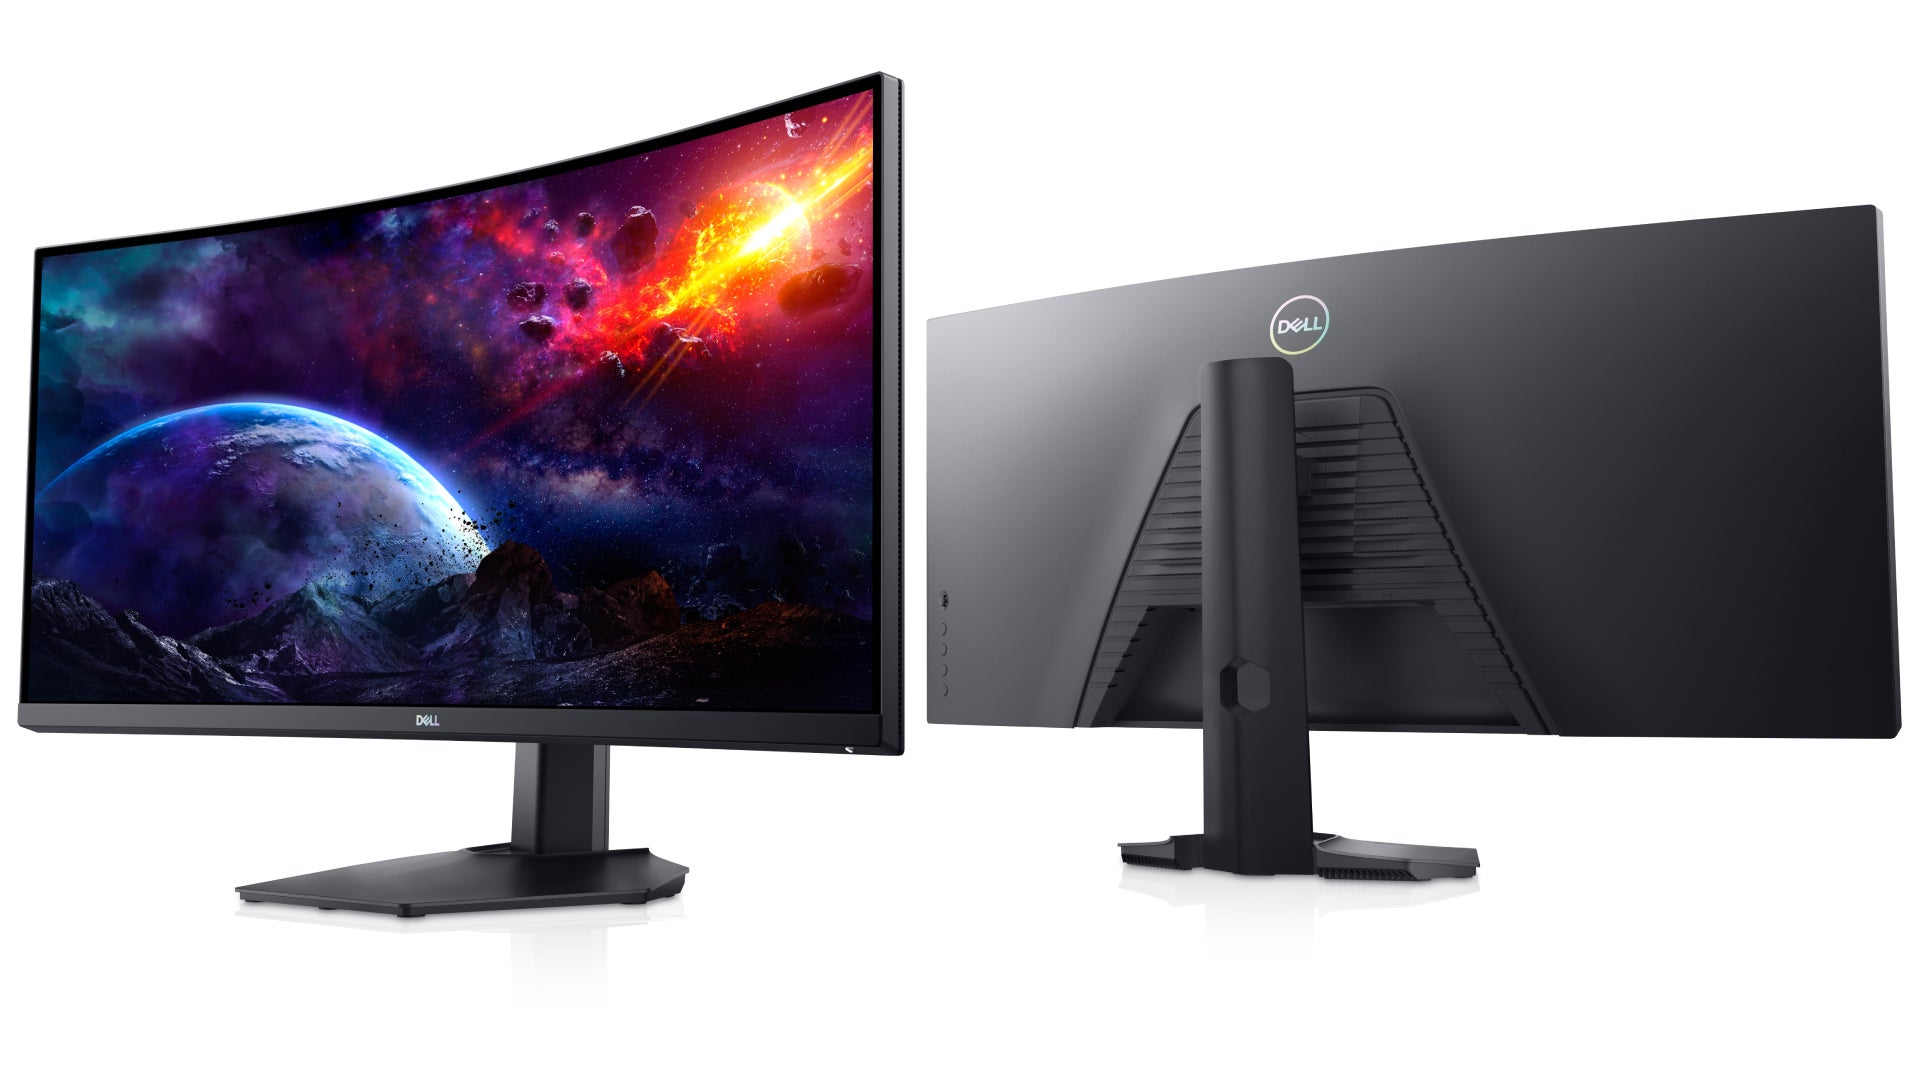 Image for Get a Dell ultrawide gaming monitor for £359